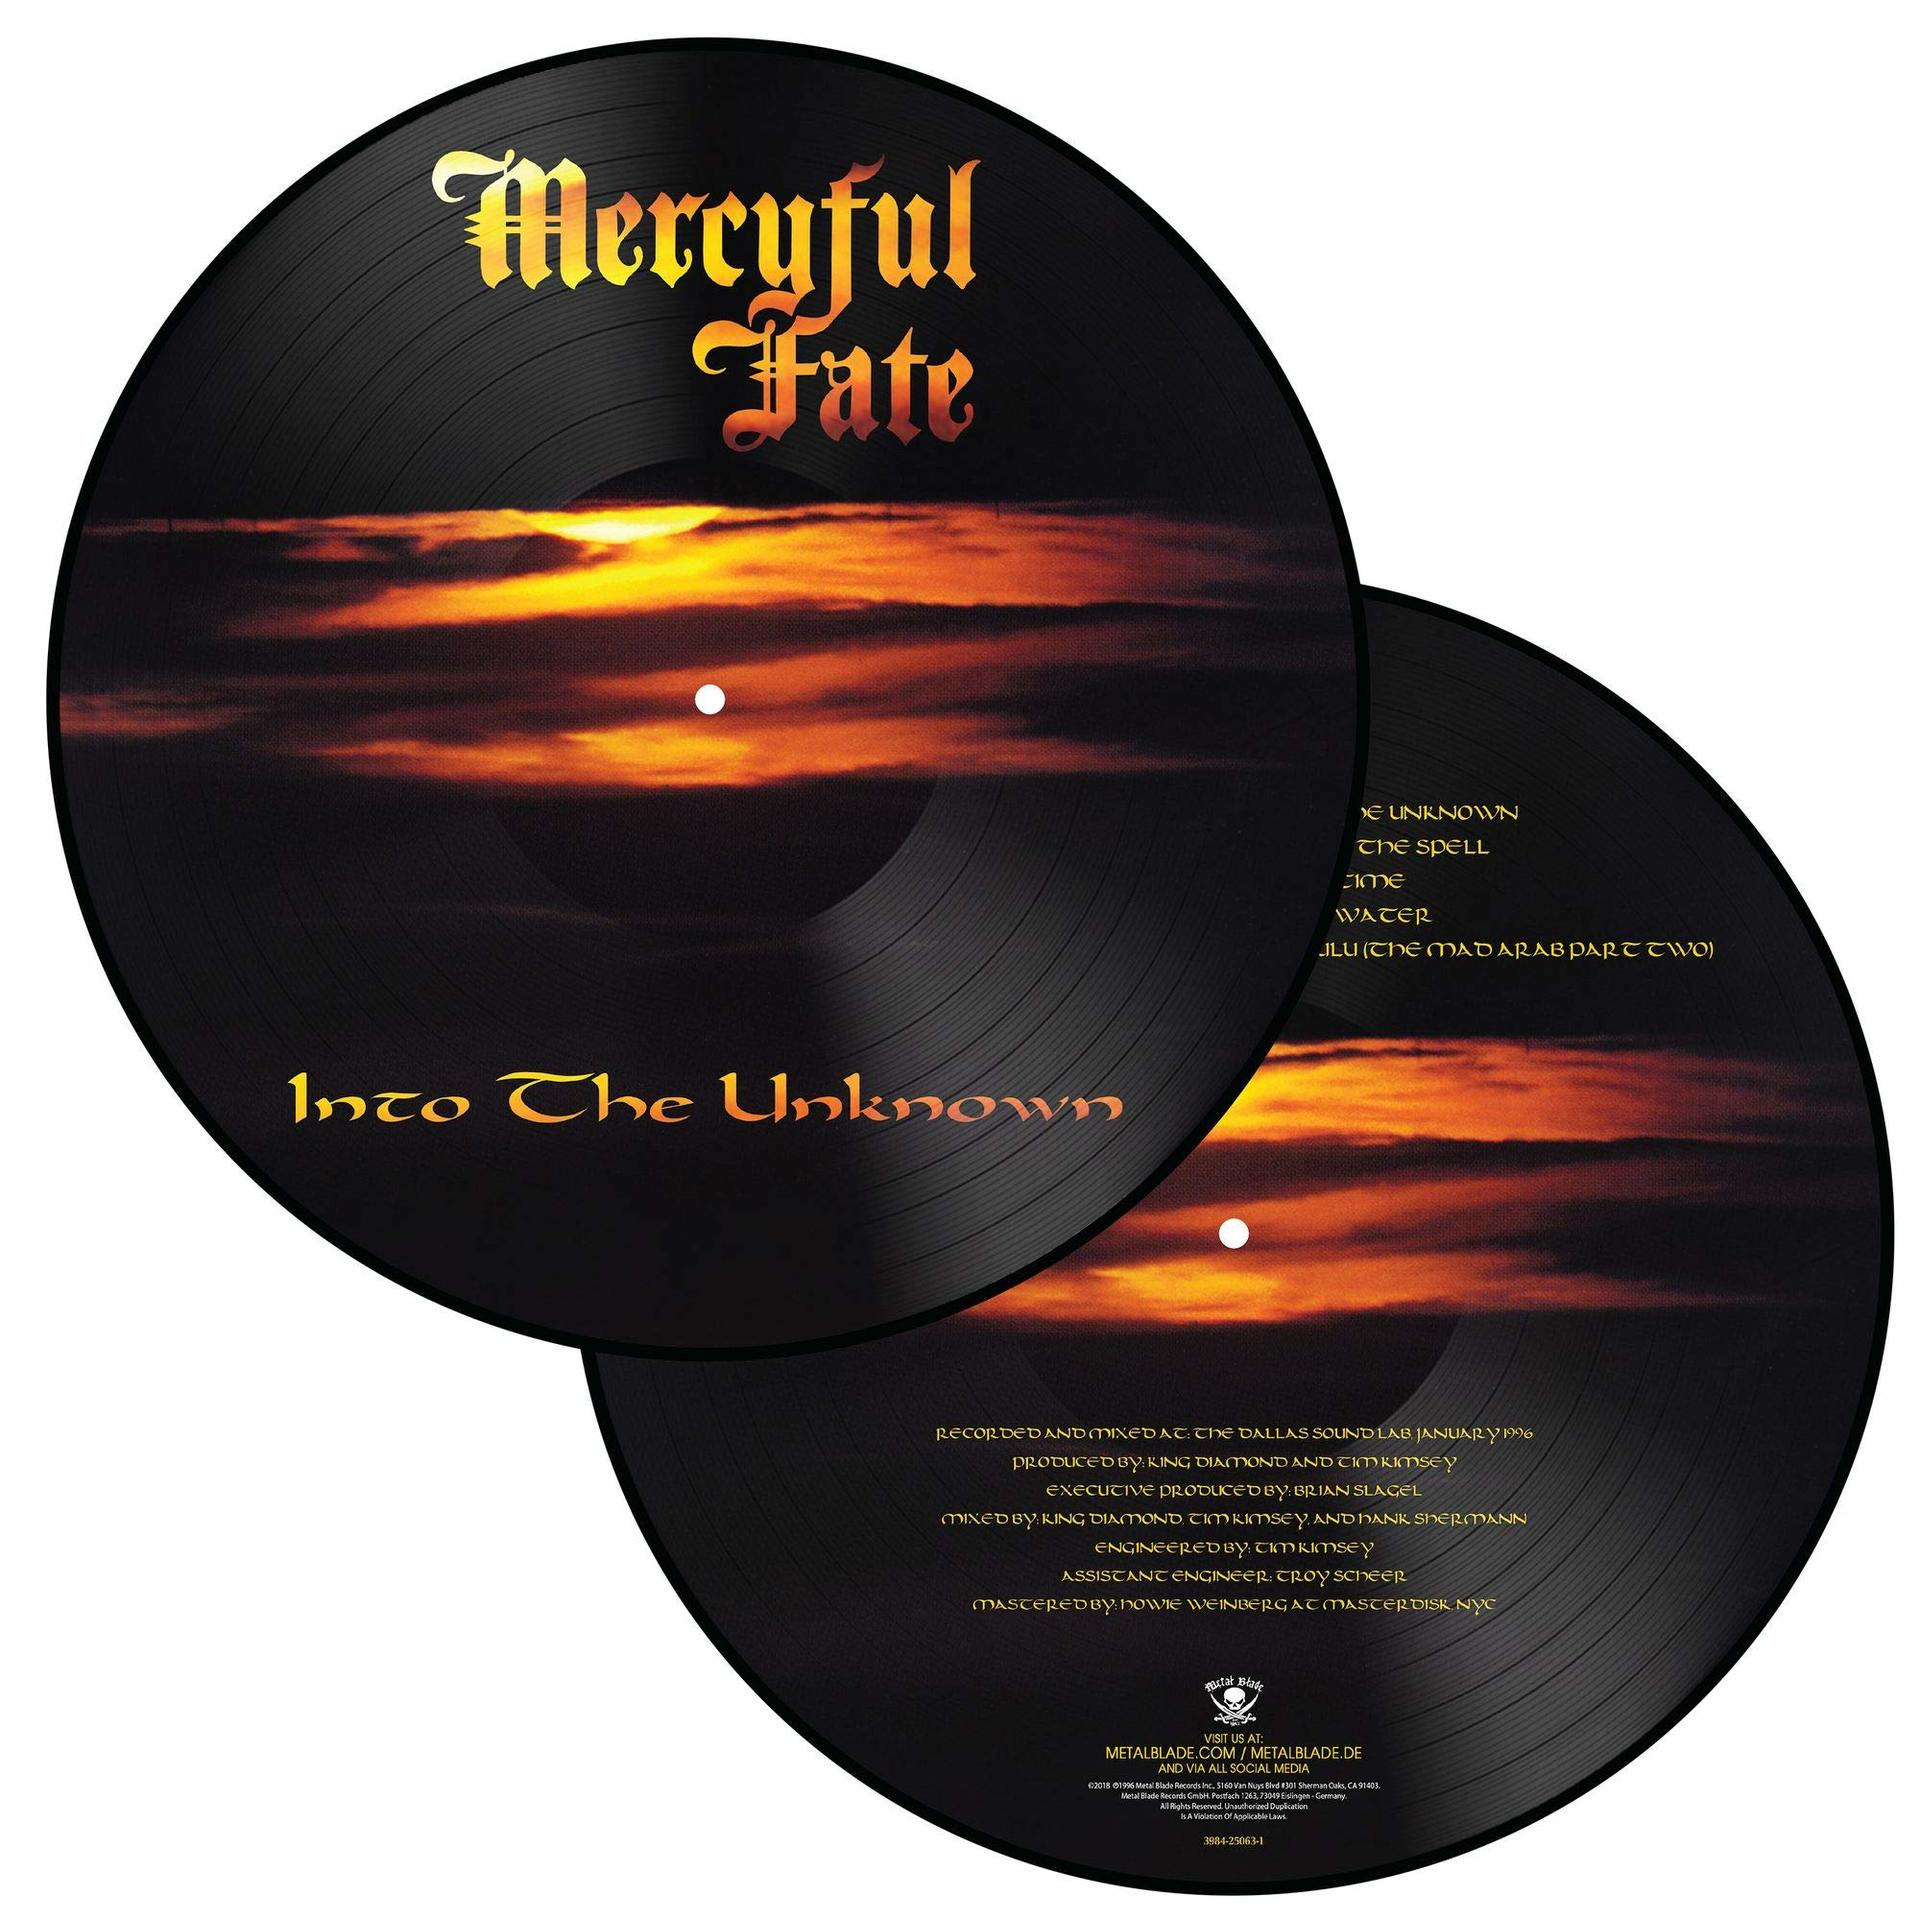 (Picture The Fate - - Mercyful Disc) (Vinyl) Into Unknown